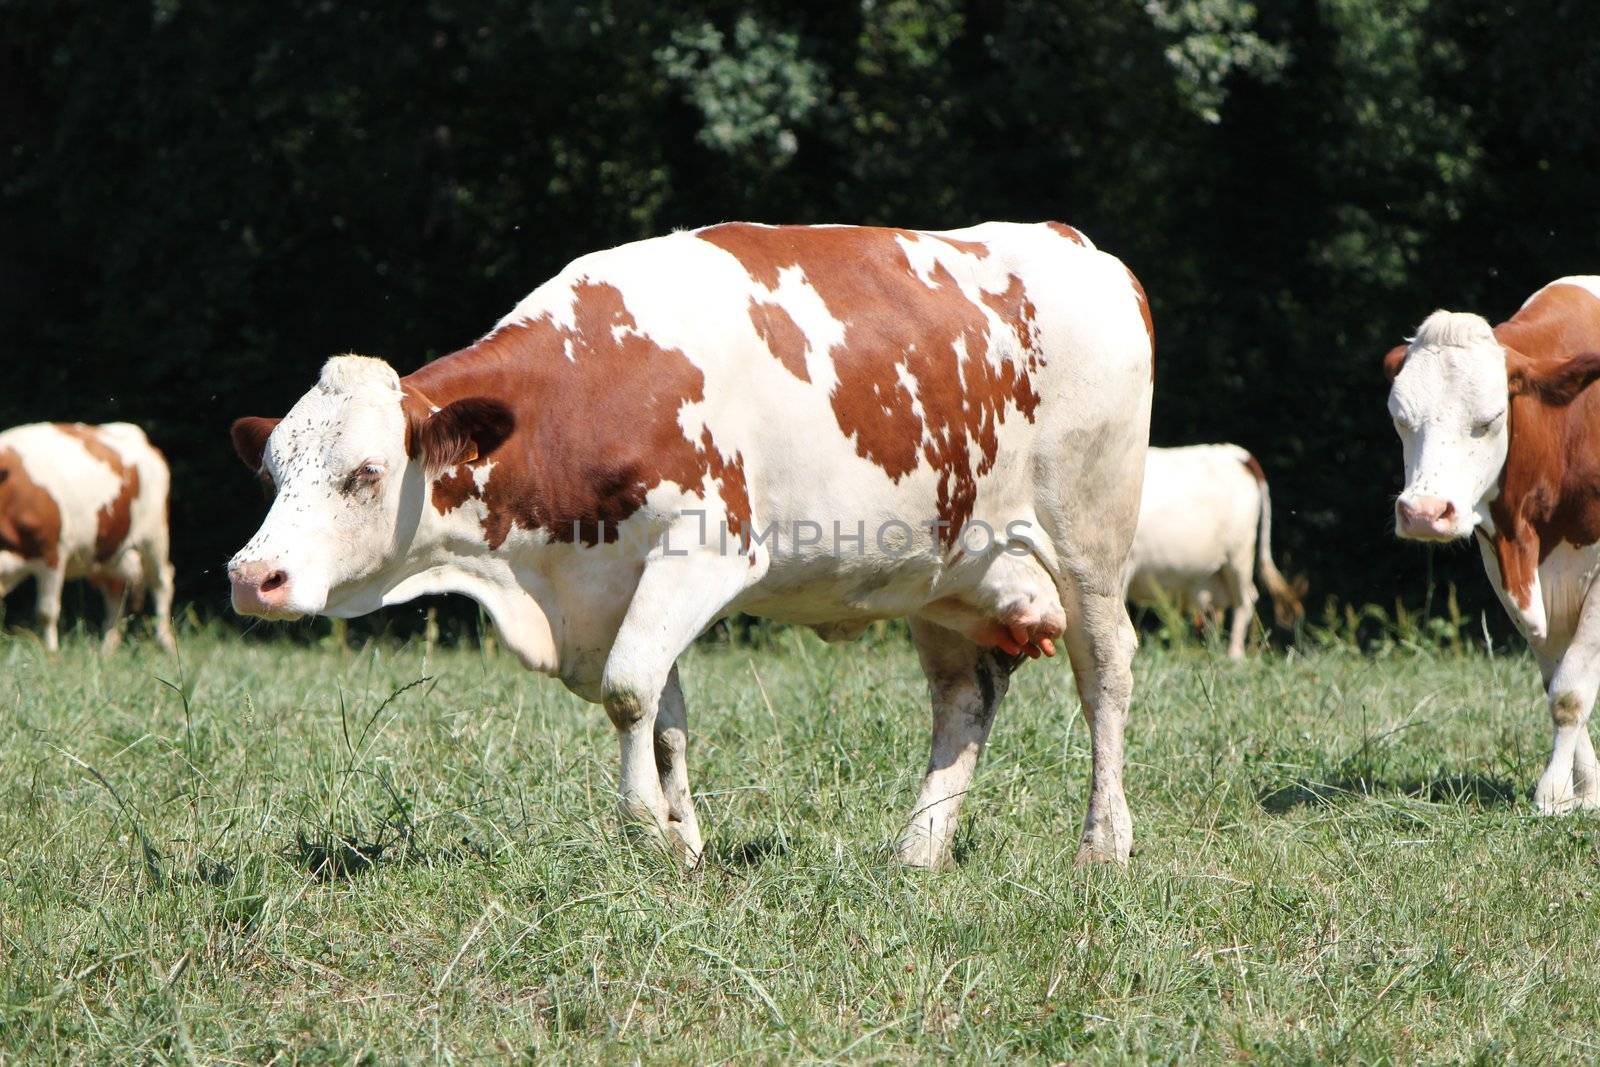 Brown and white cow walking among others in a meadow